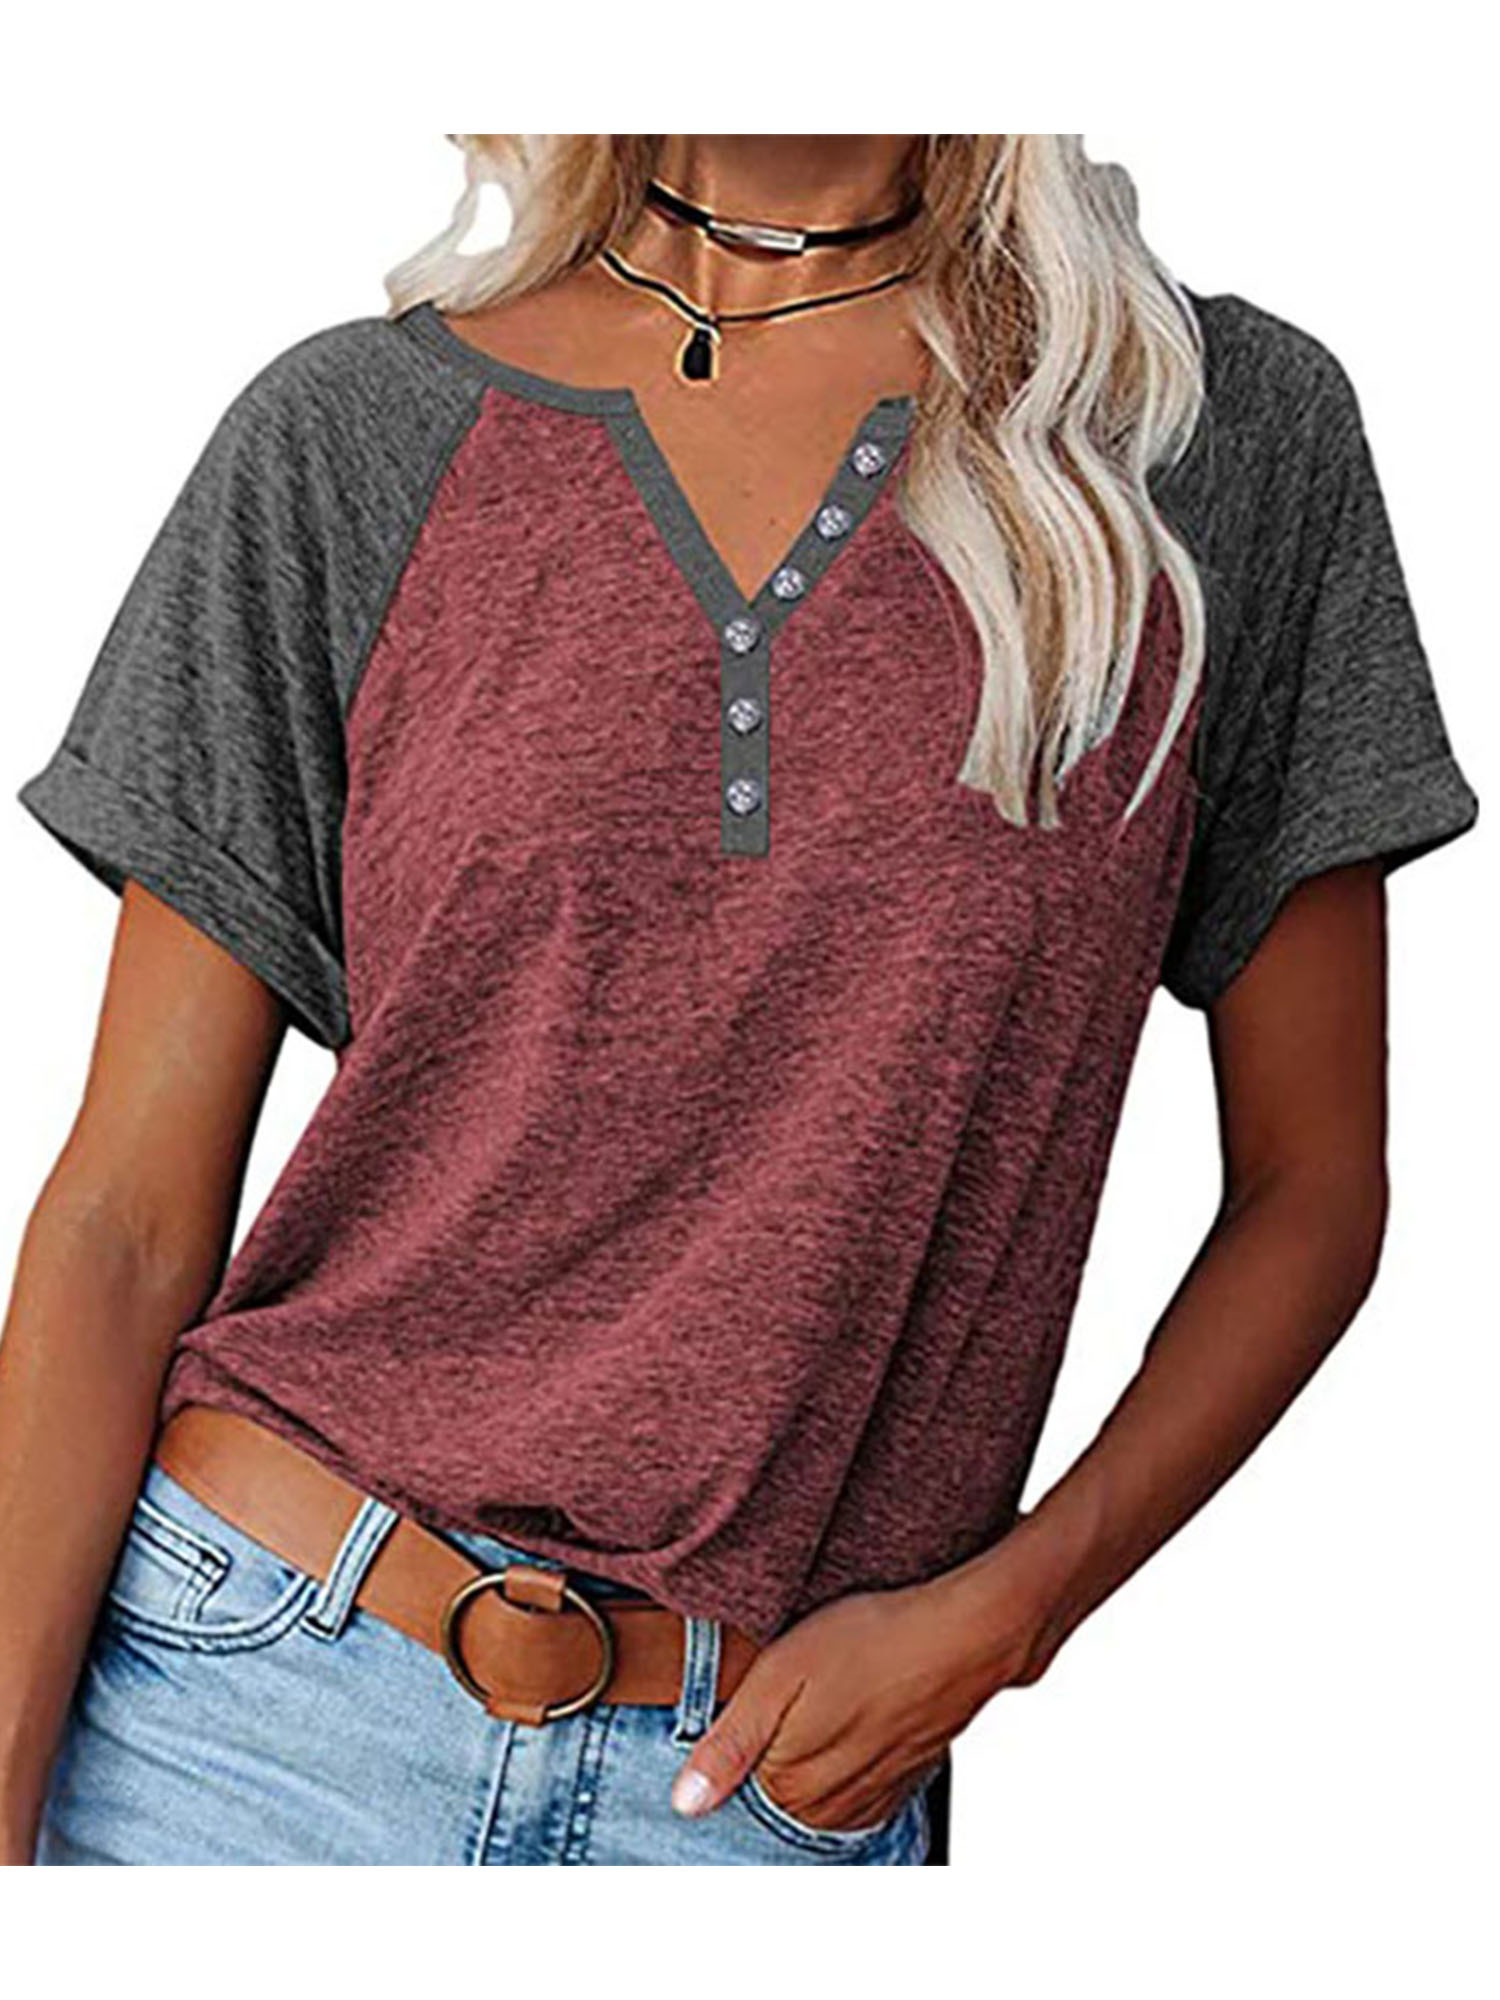 Women Ladies Casual Tops Short Sleeve Color Block T-shirt V Neck Tunic Blouse Tee Ladies Stylish Sport Athletic Tops - image 1 of 3